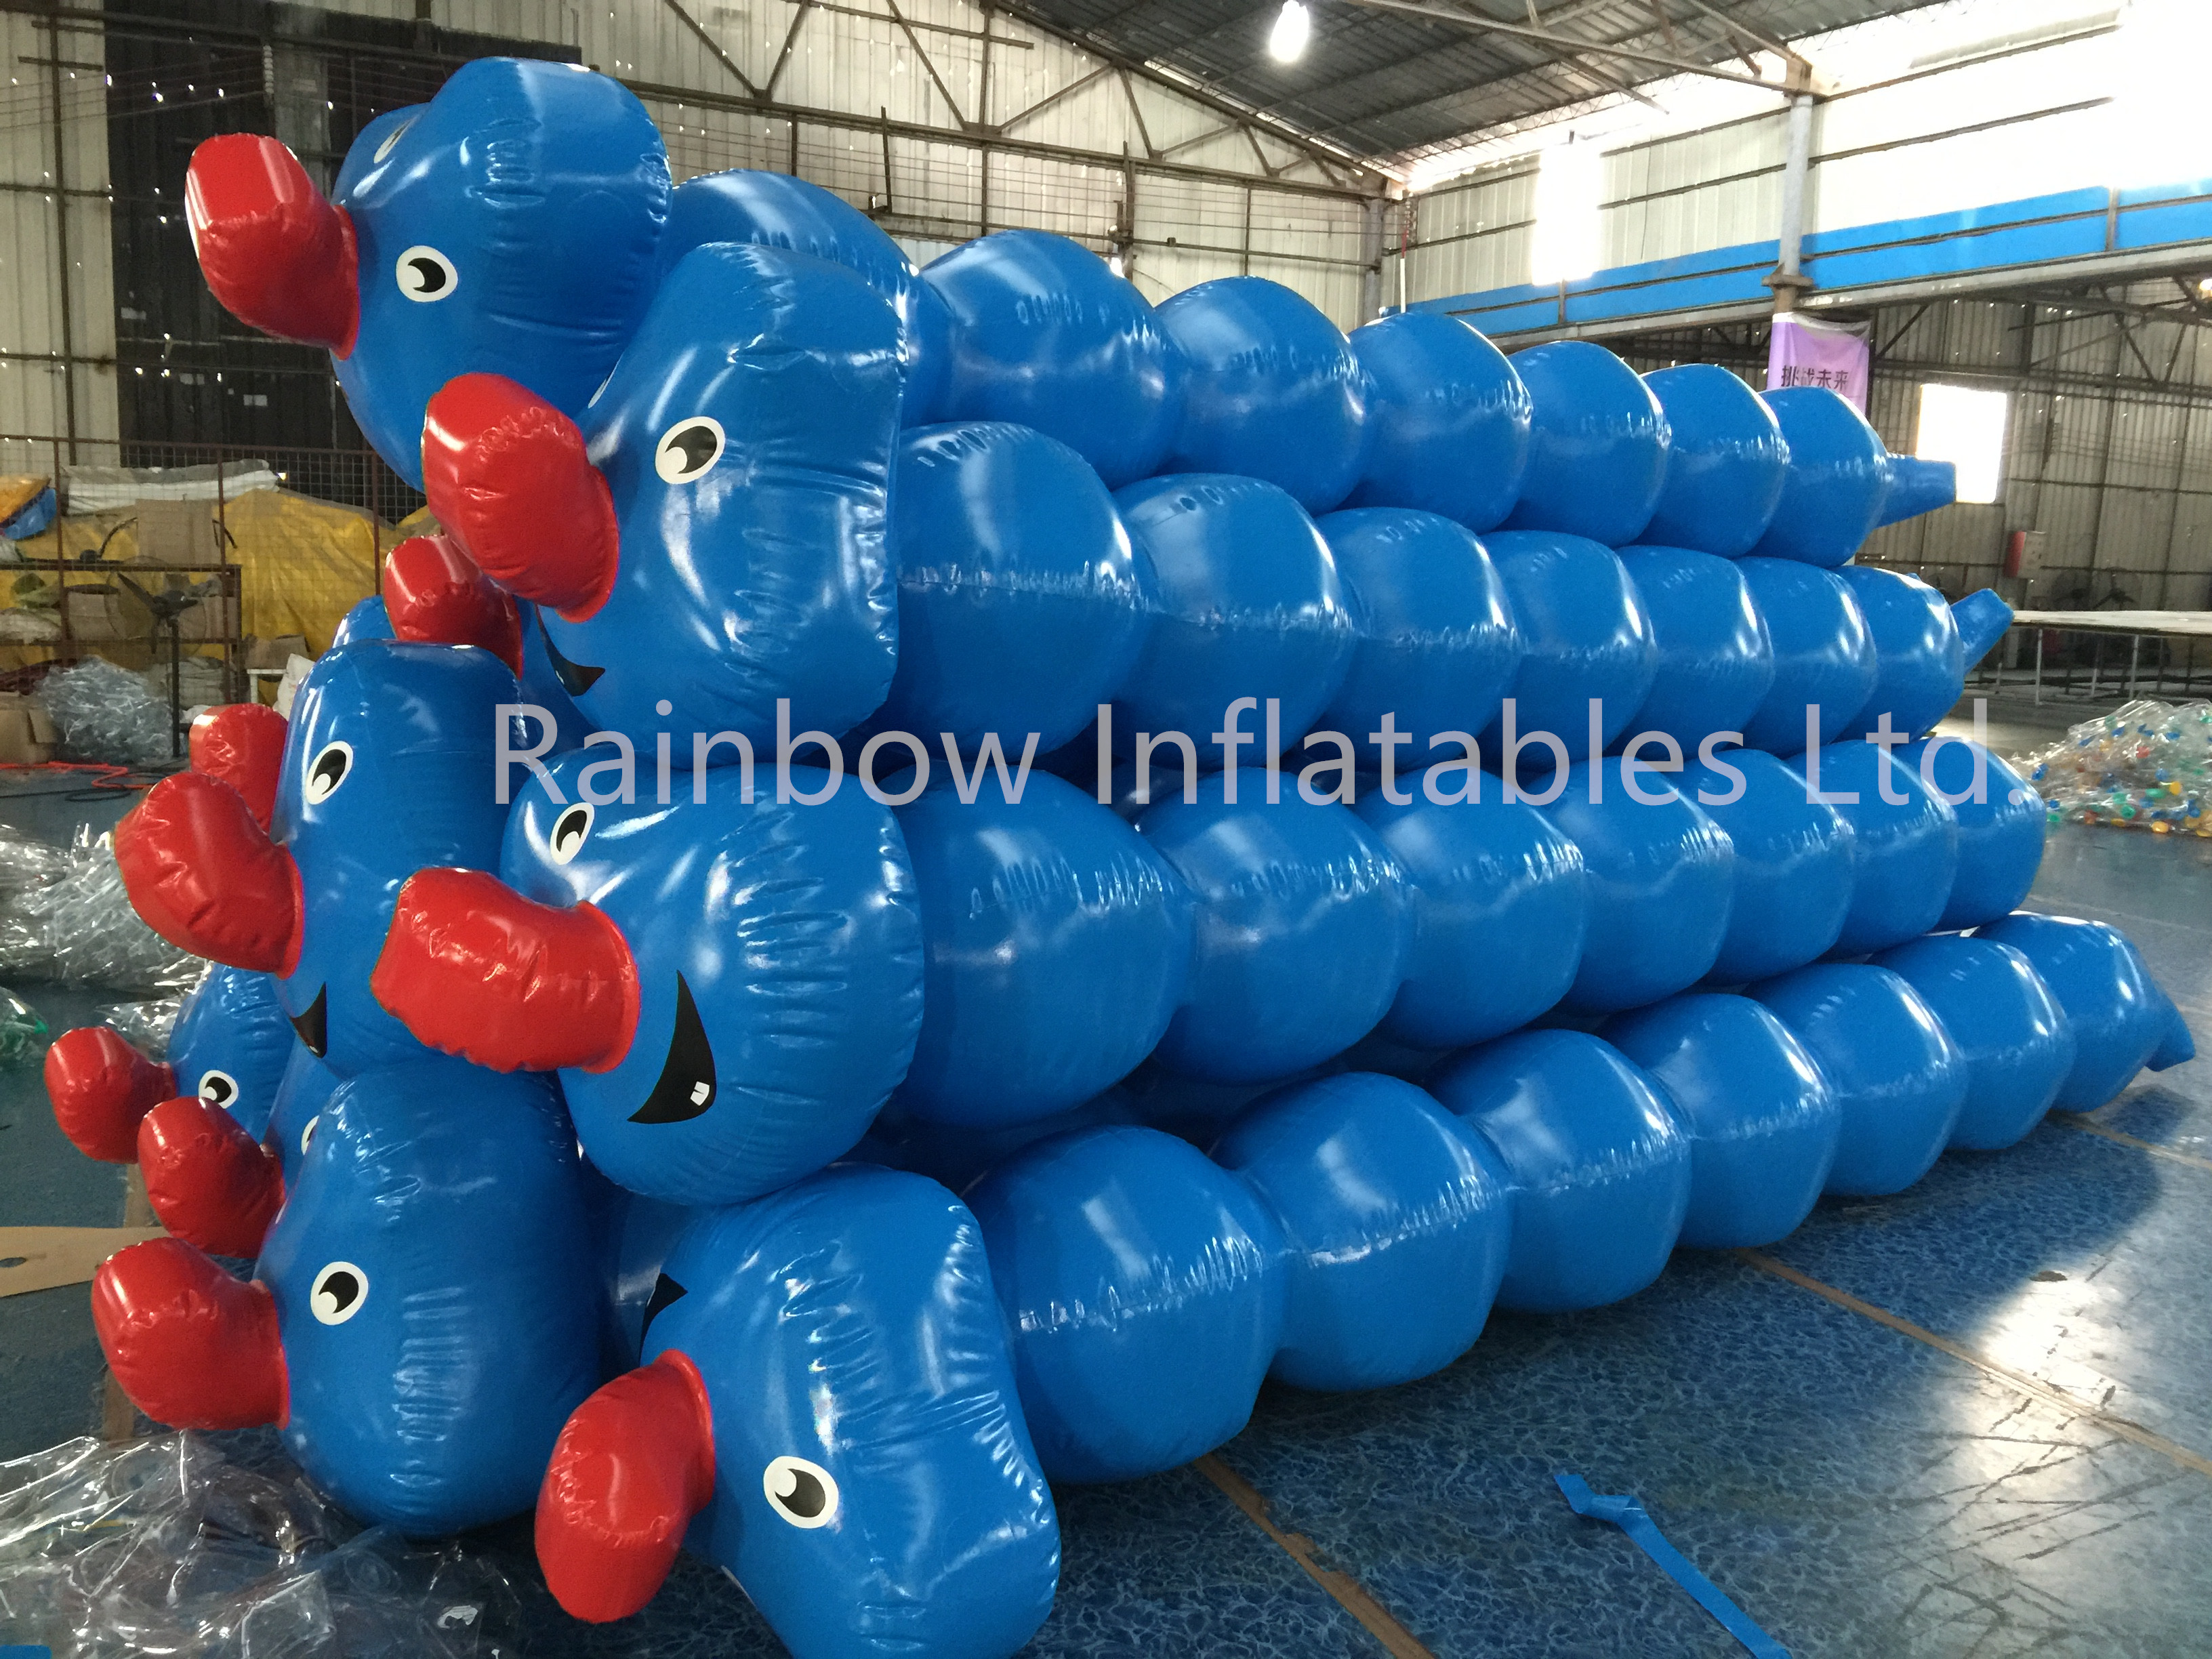 Team Building Inflatable Human Flip It Games-Rainbow Inflatables